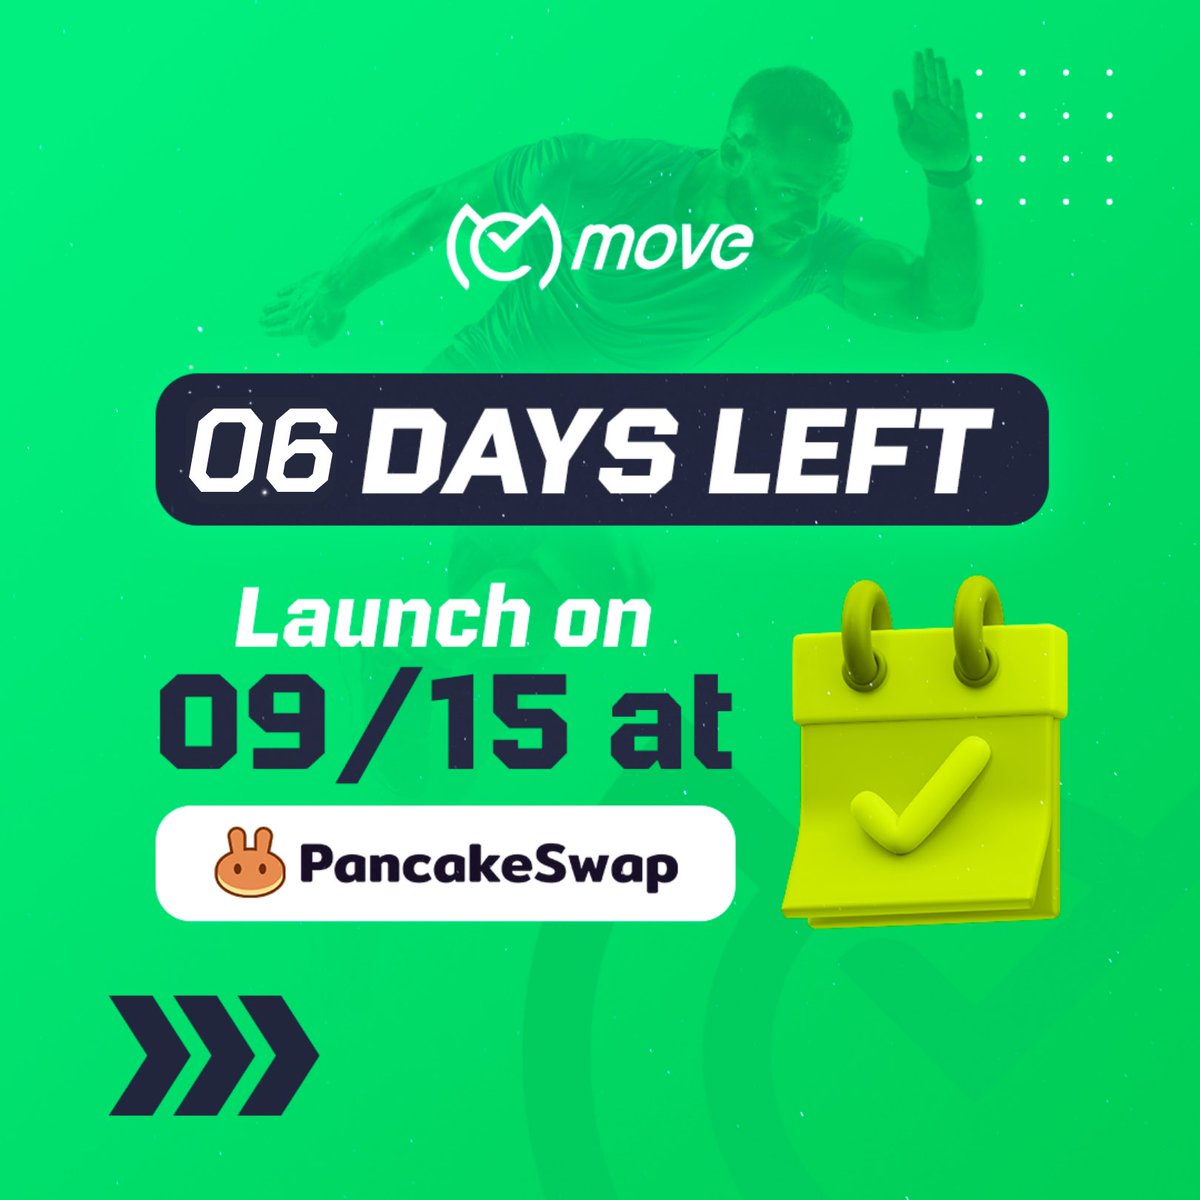 The race has begun, and there are only 06 days left until our big launch! 🚀 #MoveAppLaunch #launch #CryptoFitness